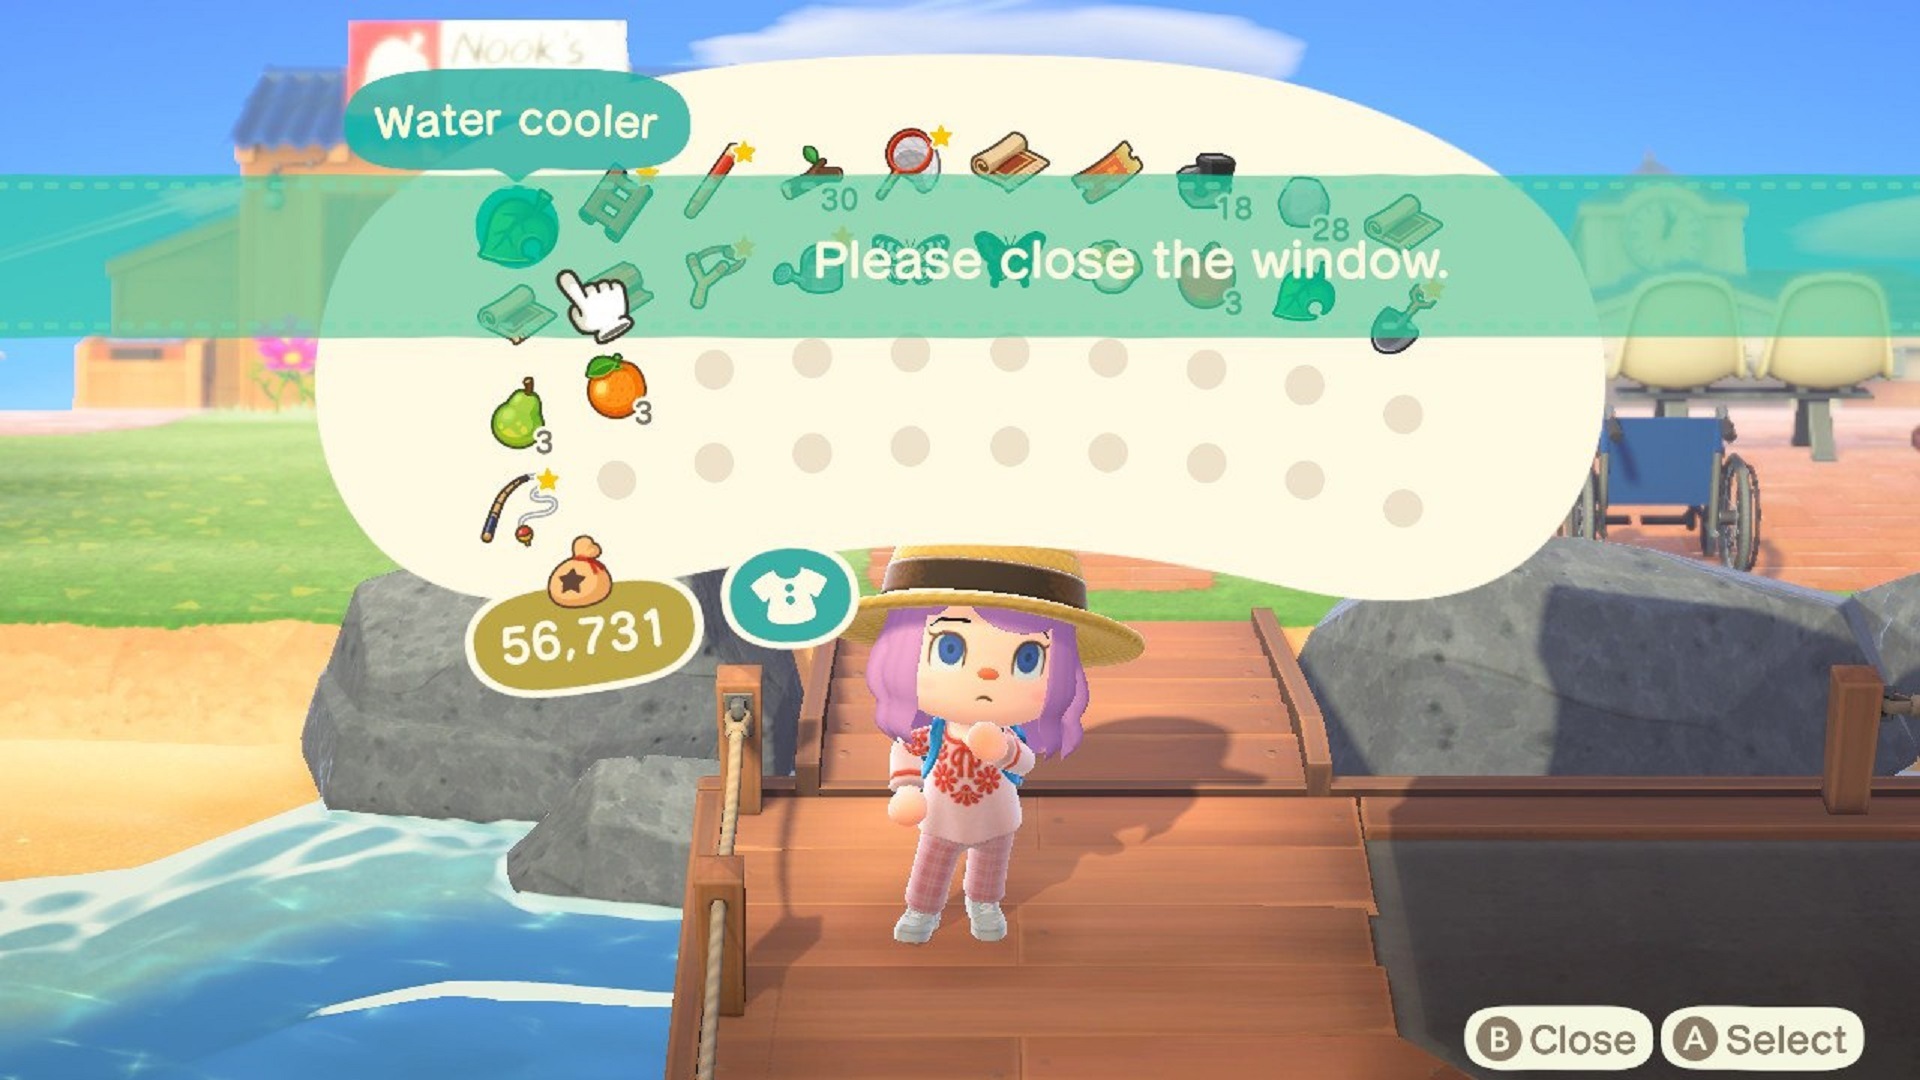 Animal Crossing: New Horizons' Nookazon Explained: How To Use The Fan-Made  Store | Gamesradar+